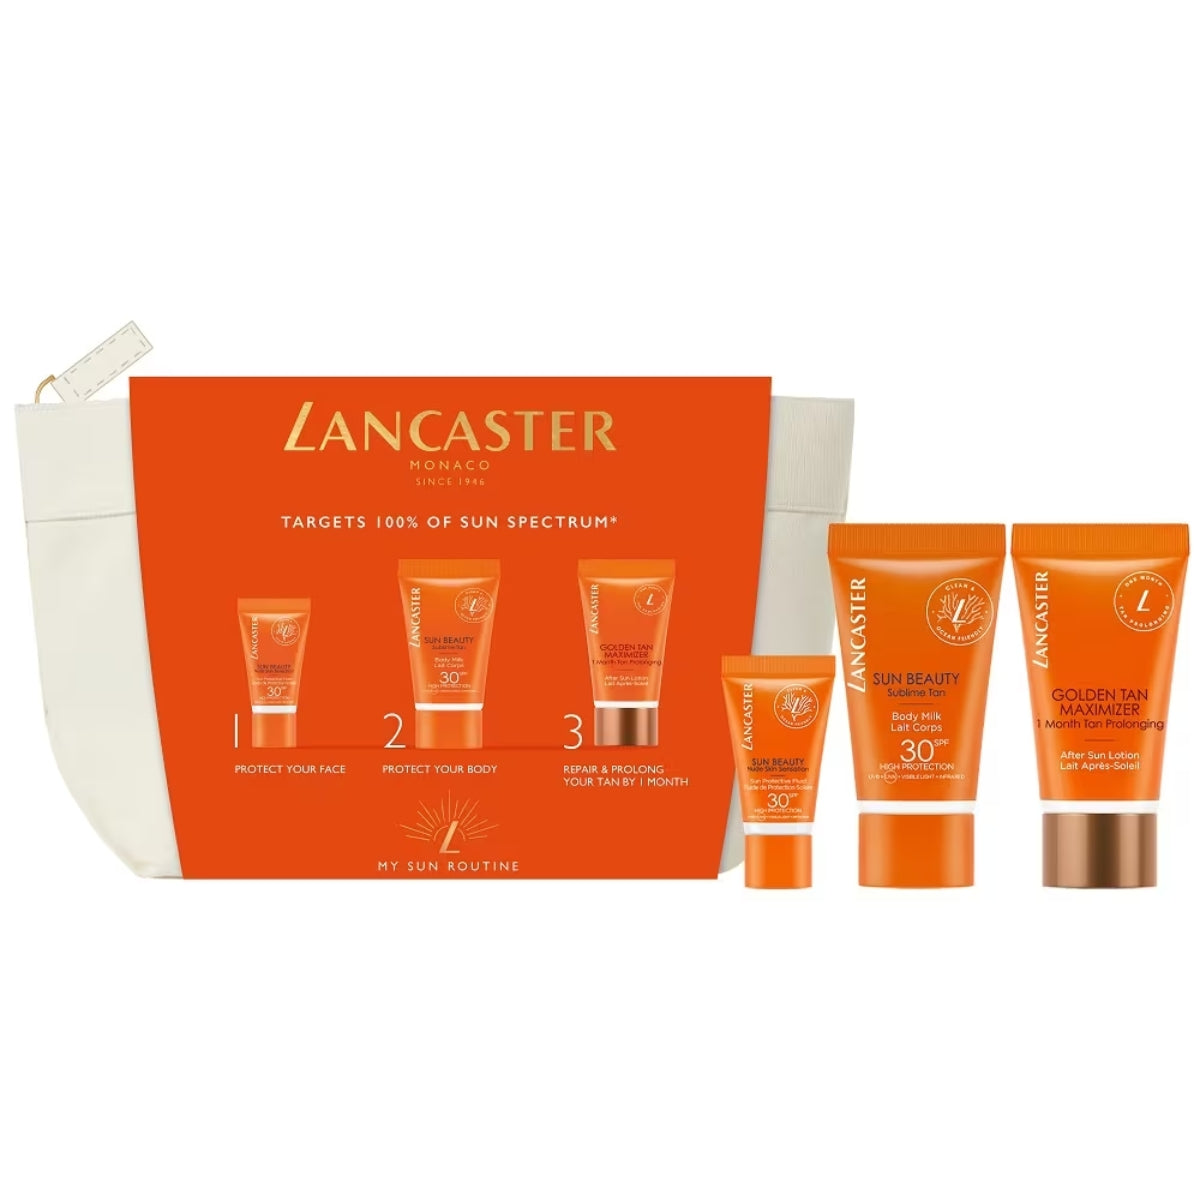 Free Lancaster My Sun Routine when you buy 2 or more products from Lancaster. One gift per person. While Stocks Last.